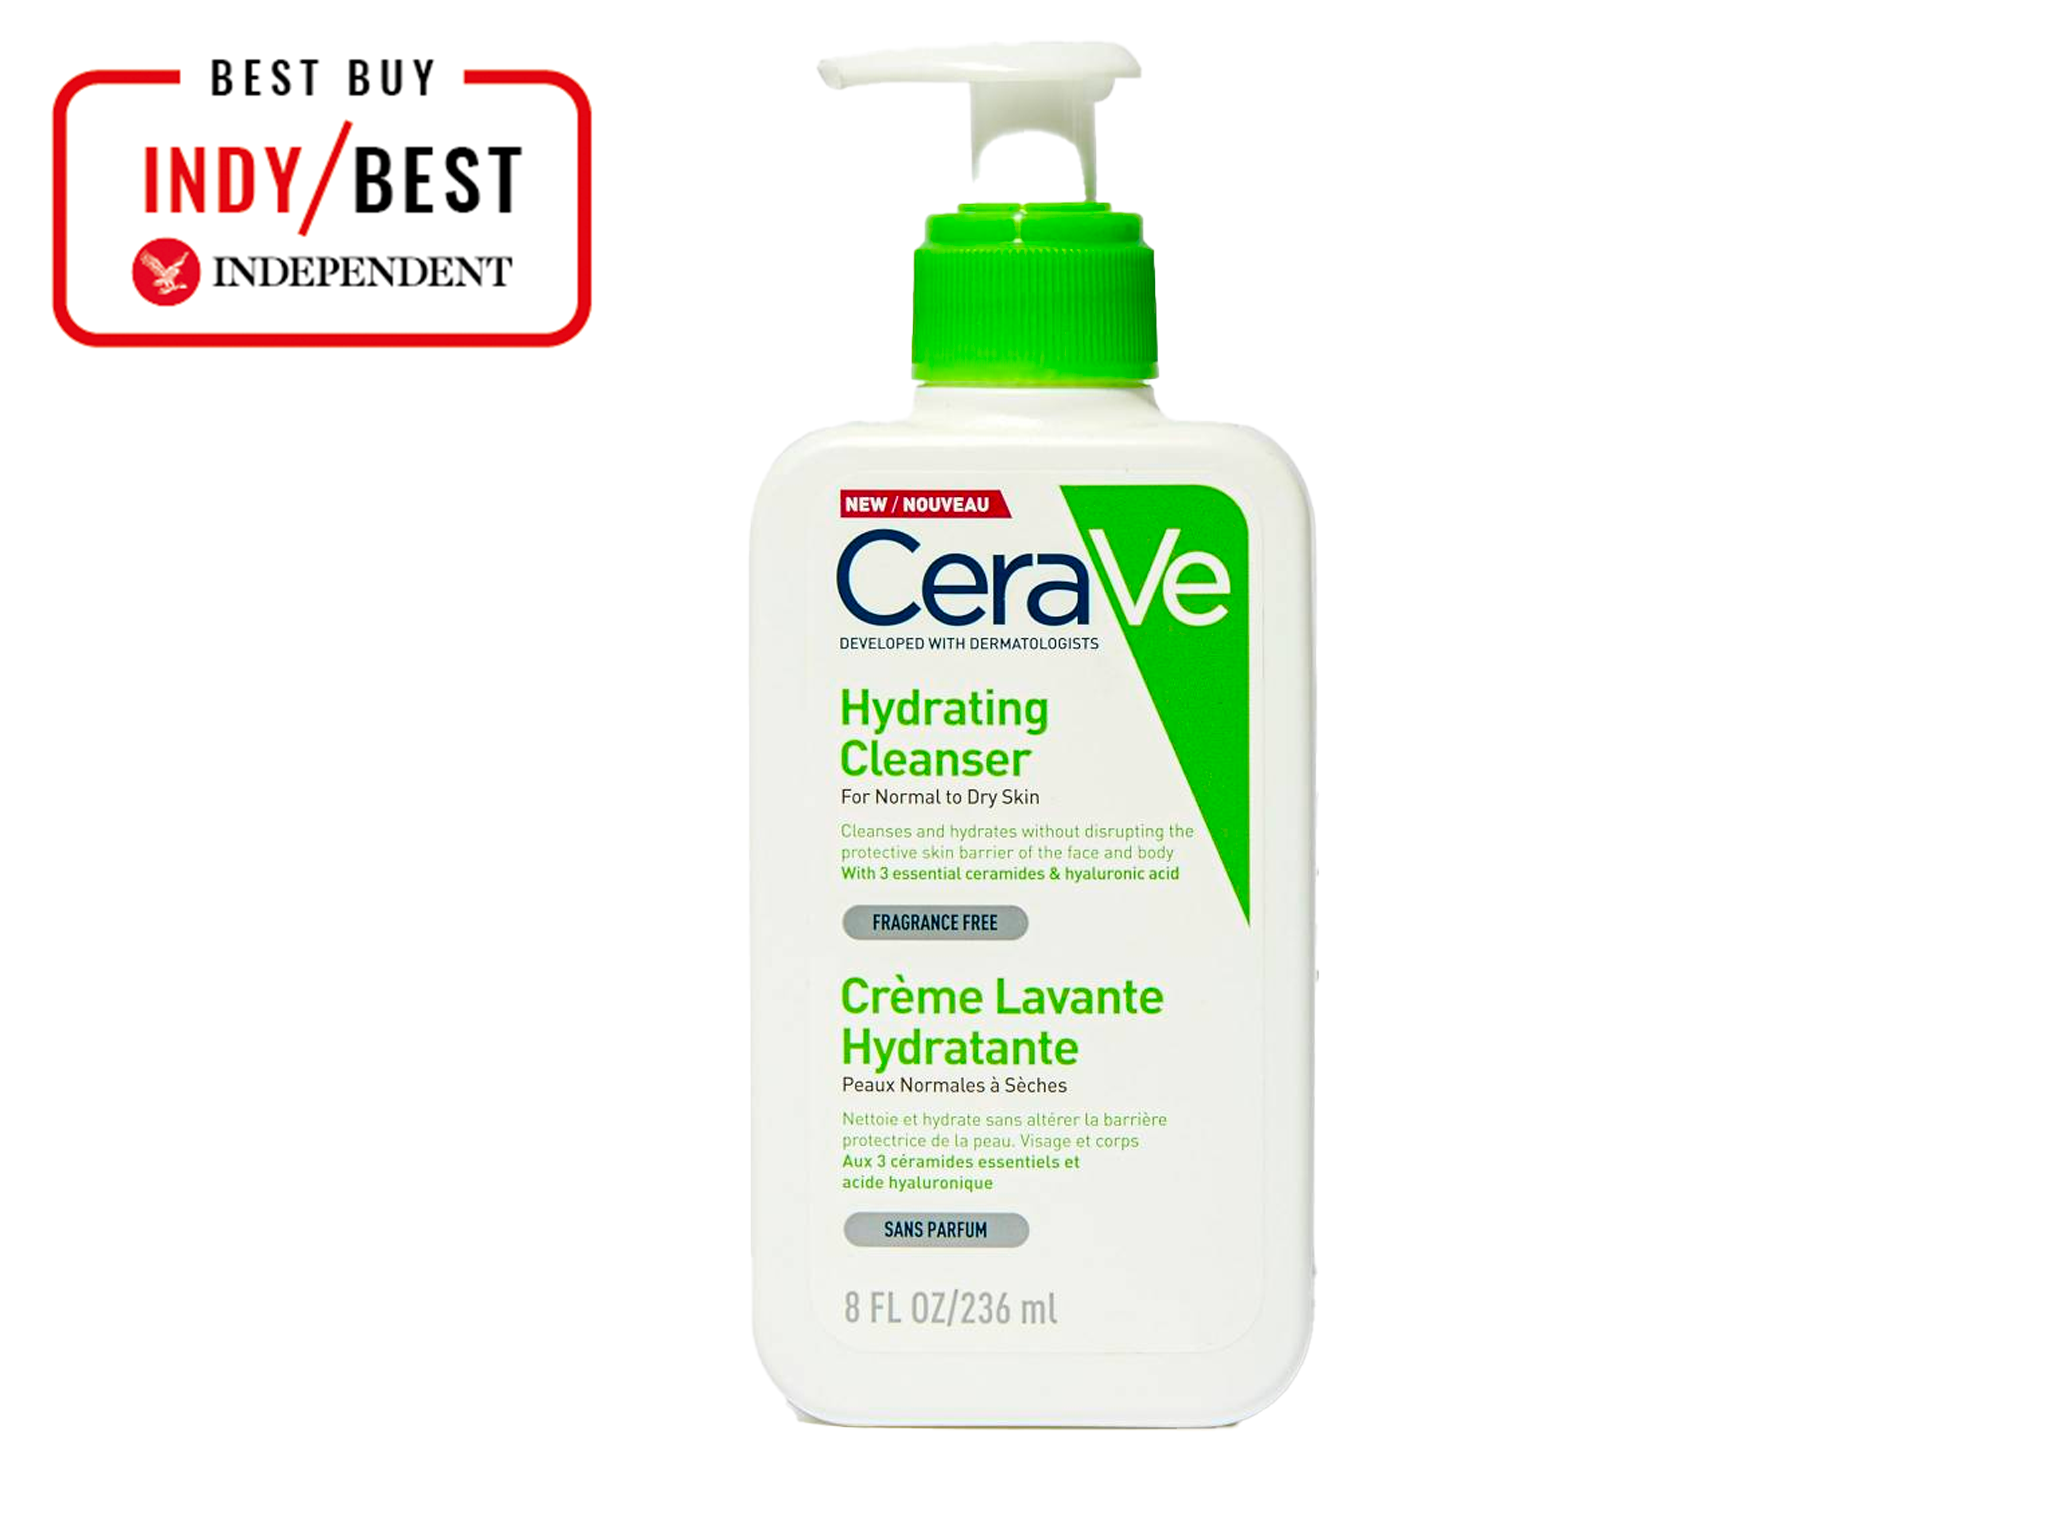 Cerave-cleanser-indybest